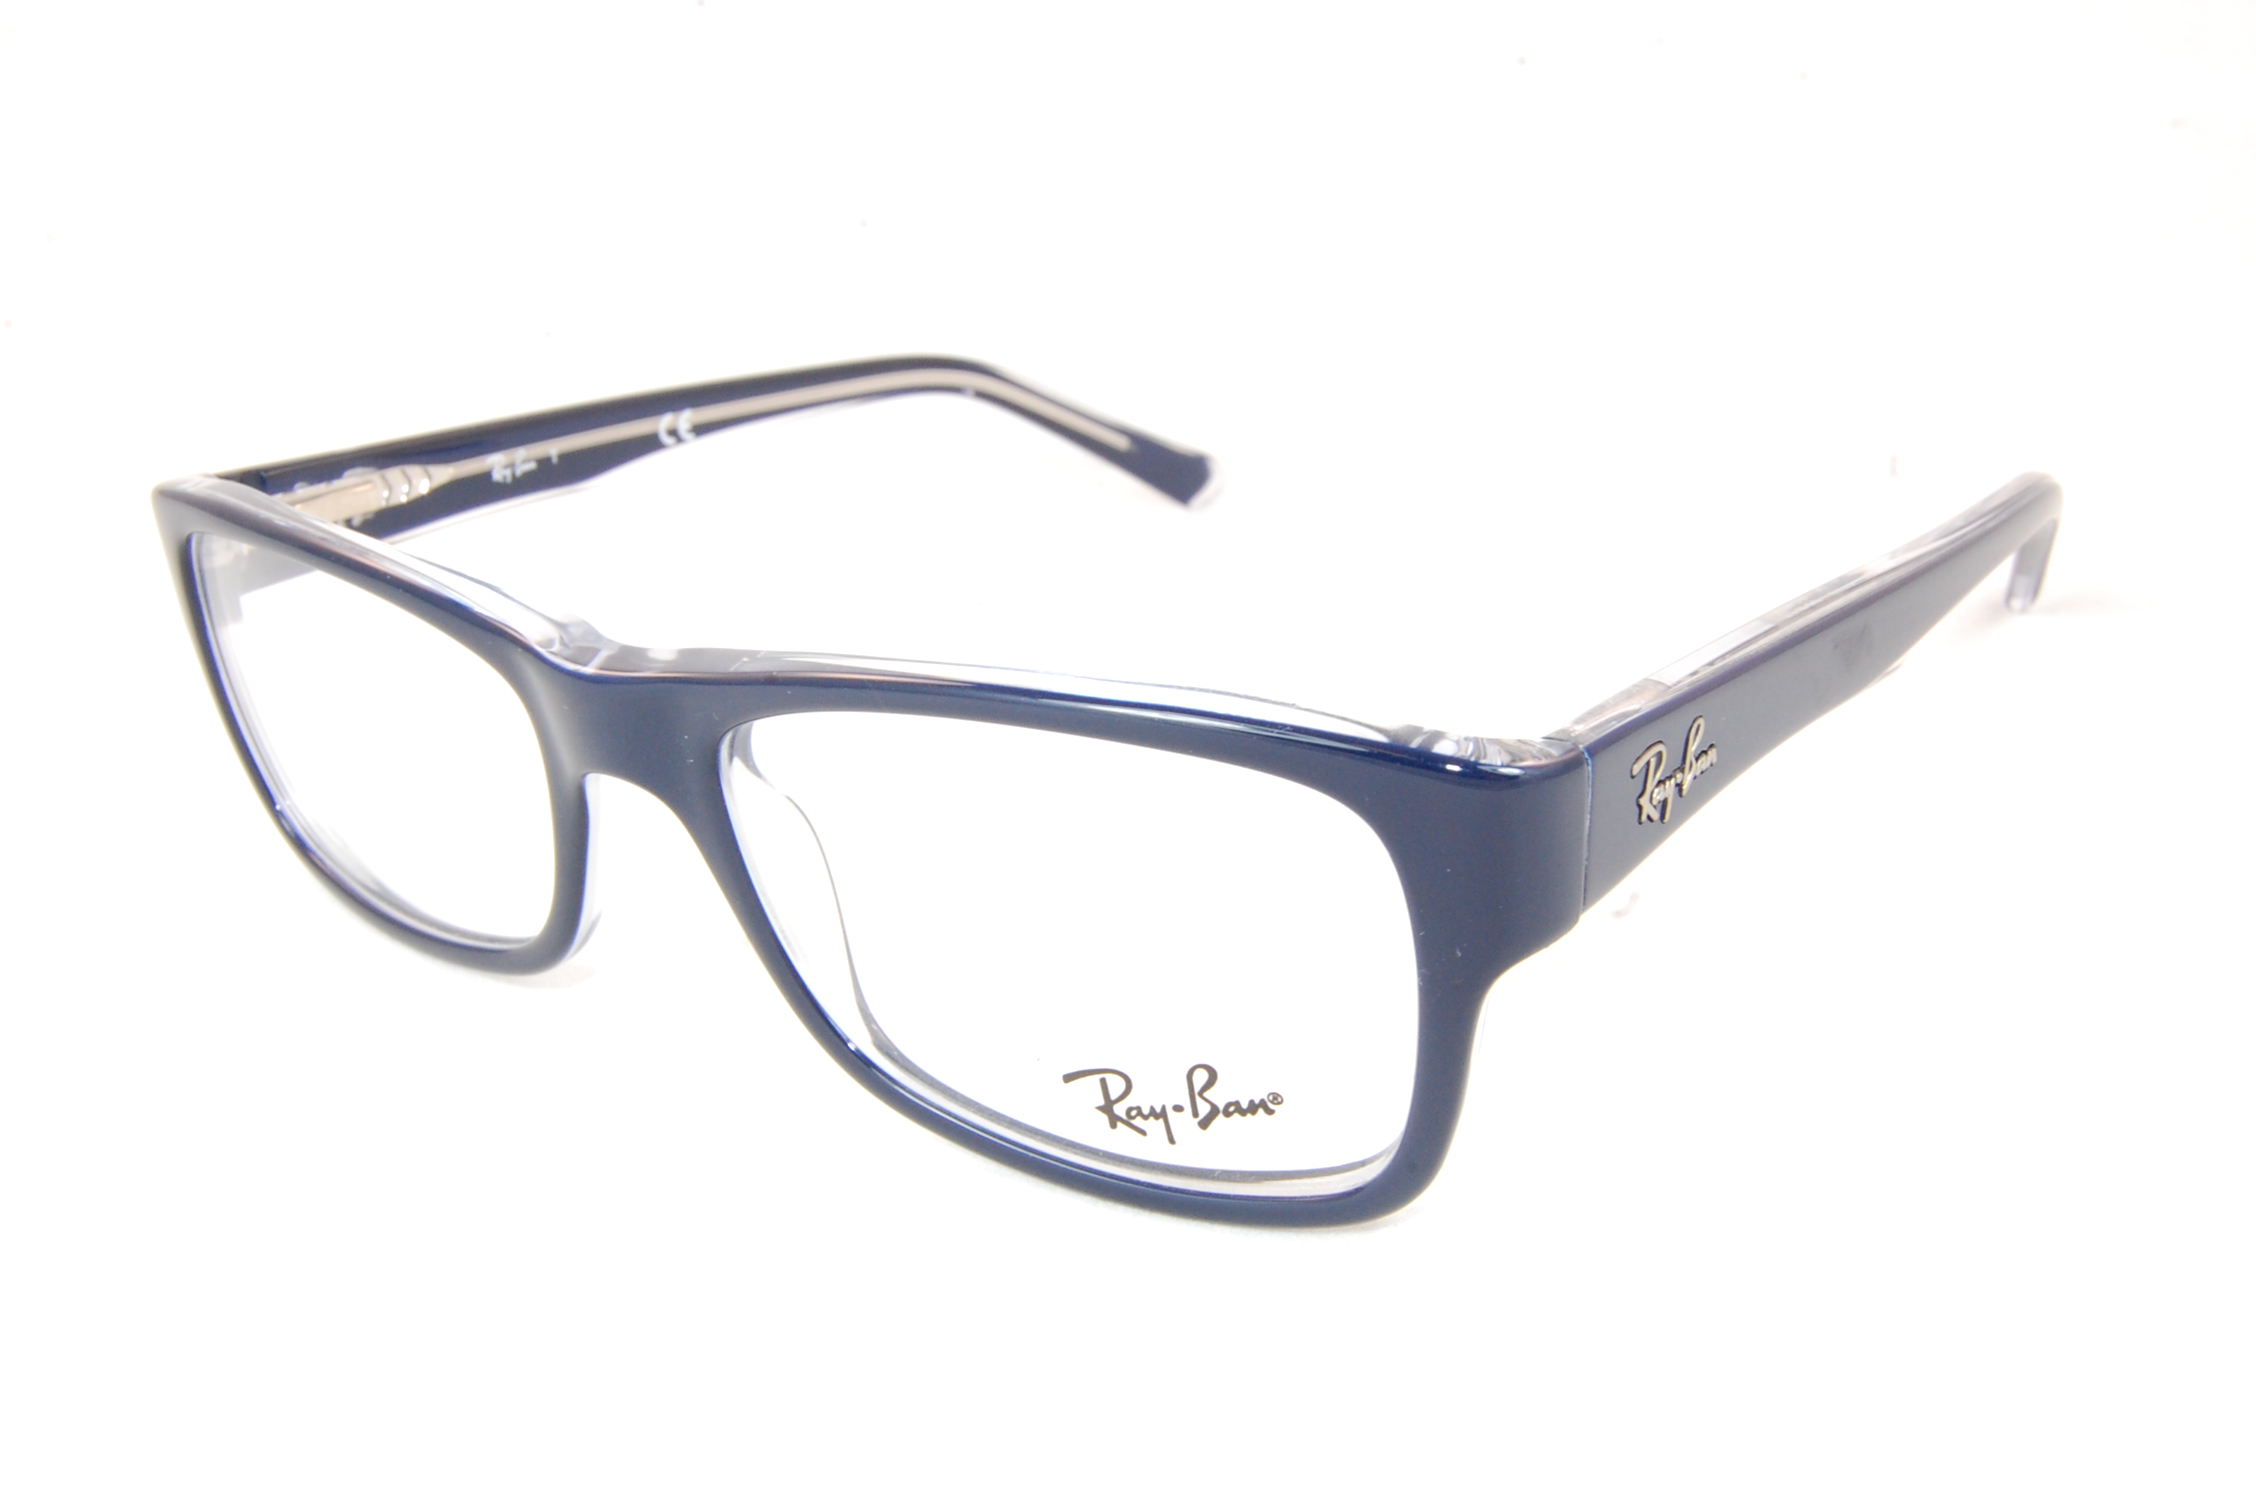 RAY-BAN OPTIQUE 10/10 FACHES THUMESNIL